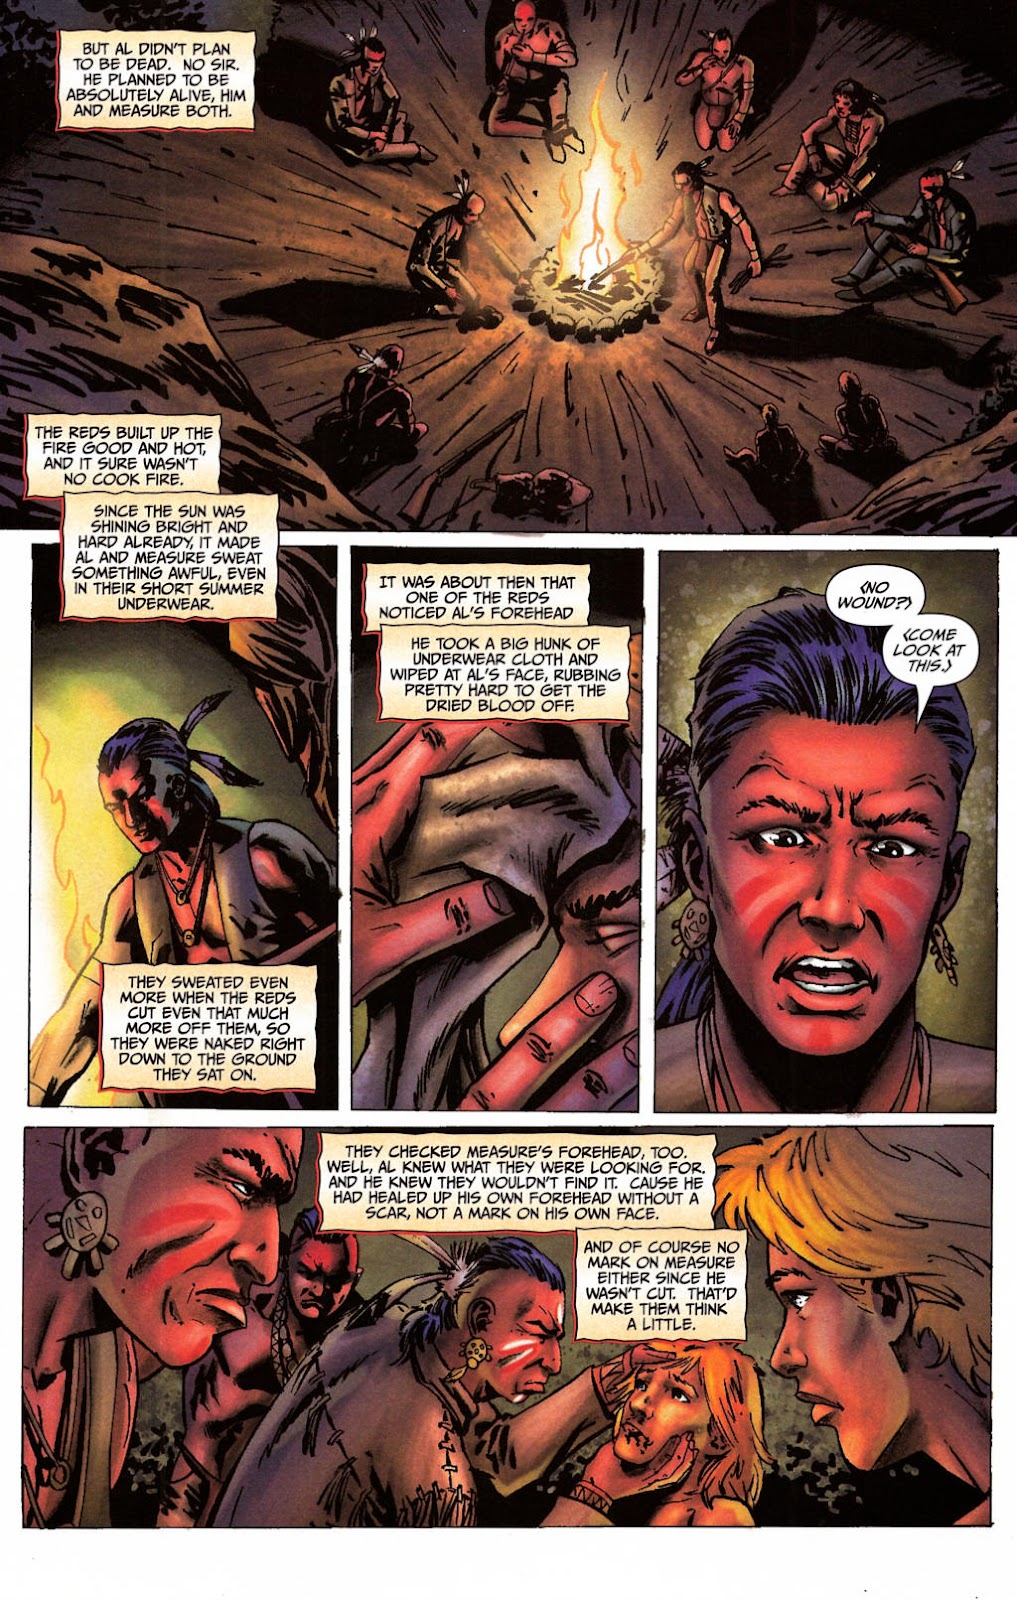 Red Prophet: The Tales of Alvin Maker issue 5 - Page 10